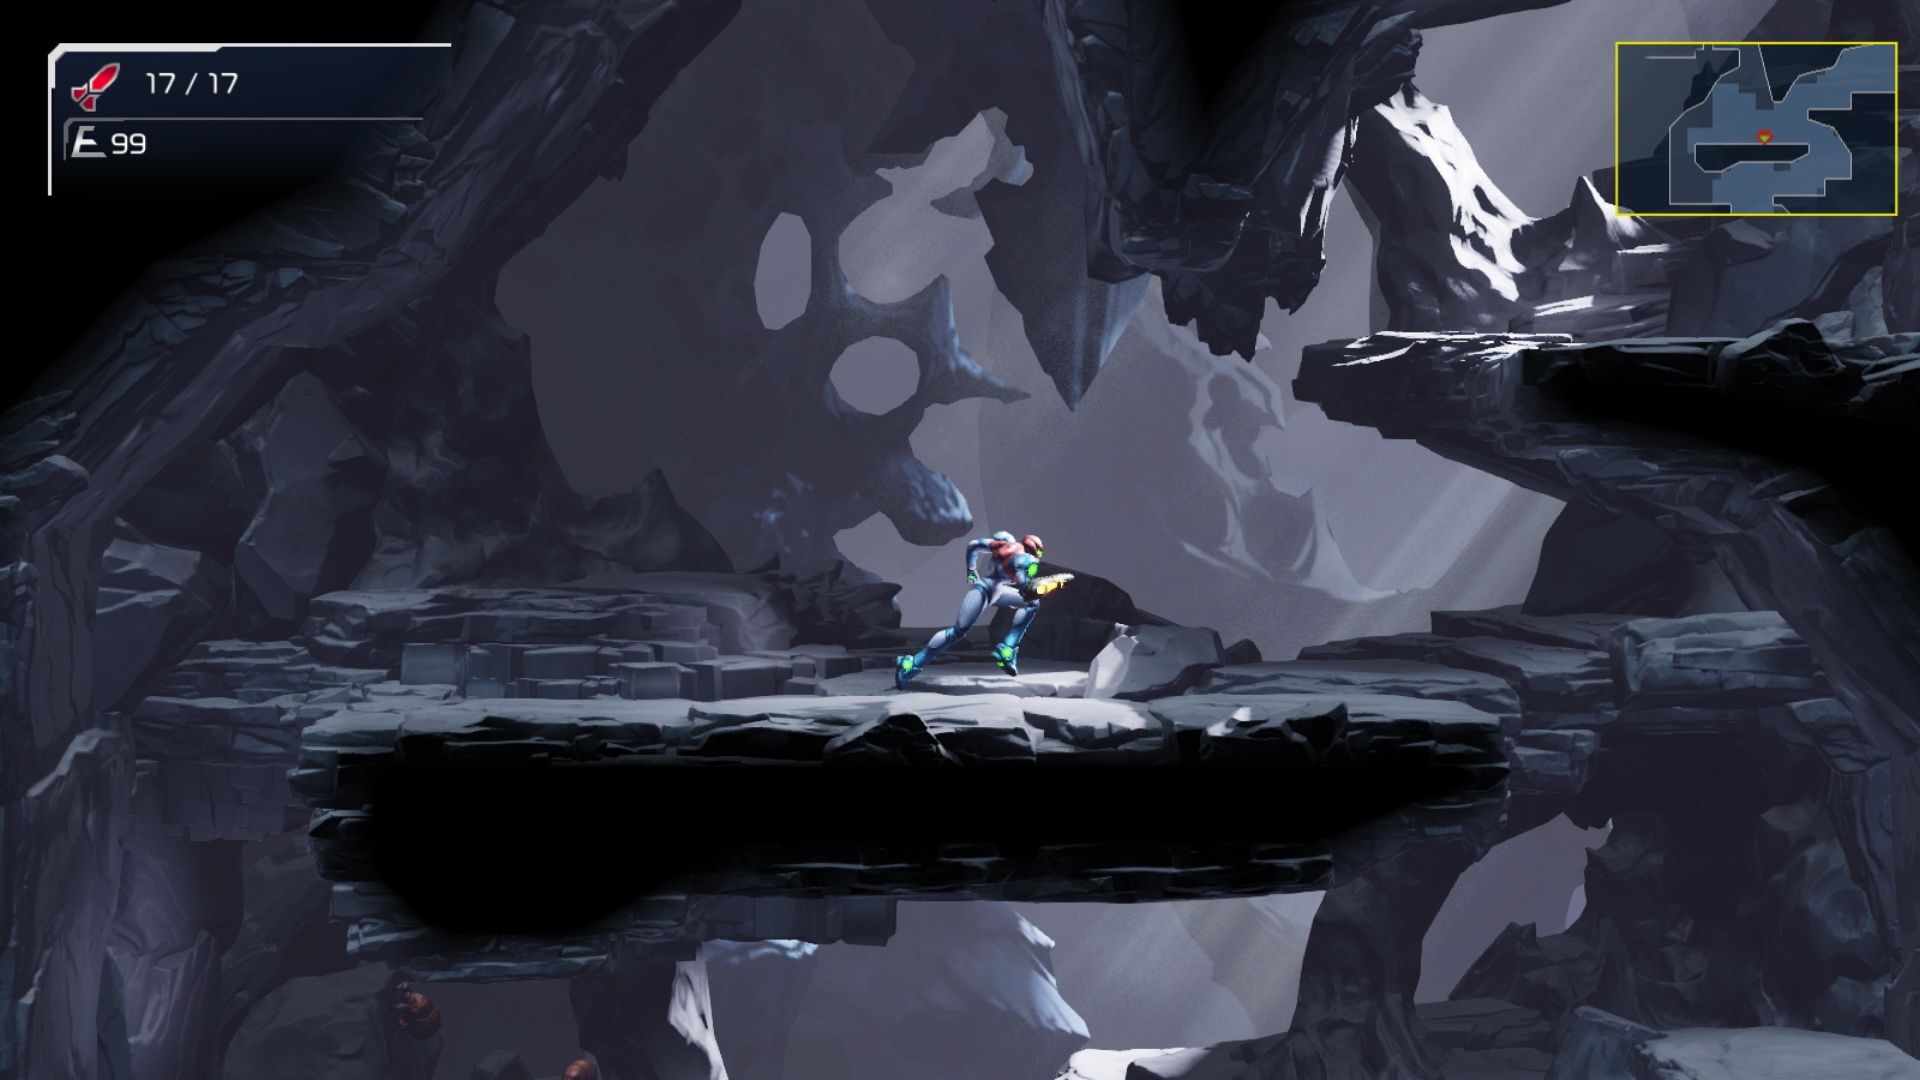 Video game screenshot showing the side view of a character in red, white and blue armor running through a cave